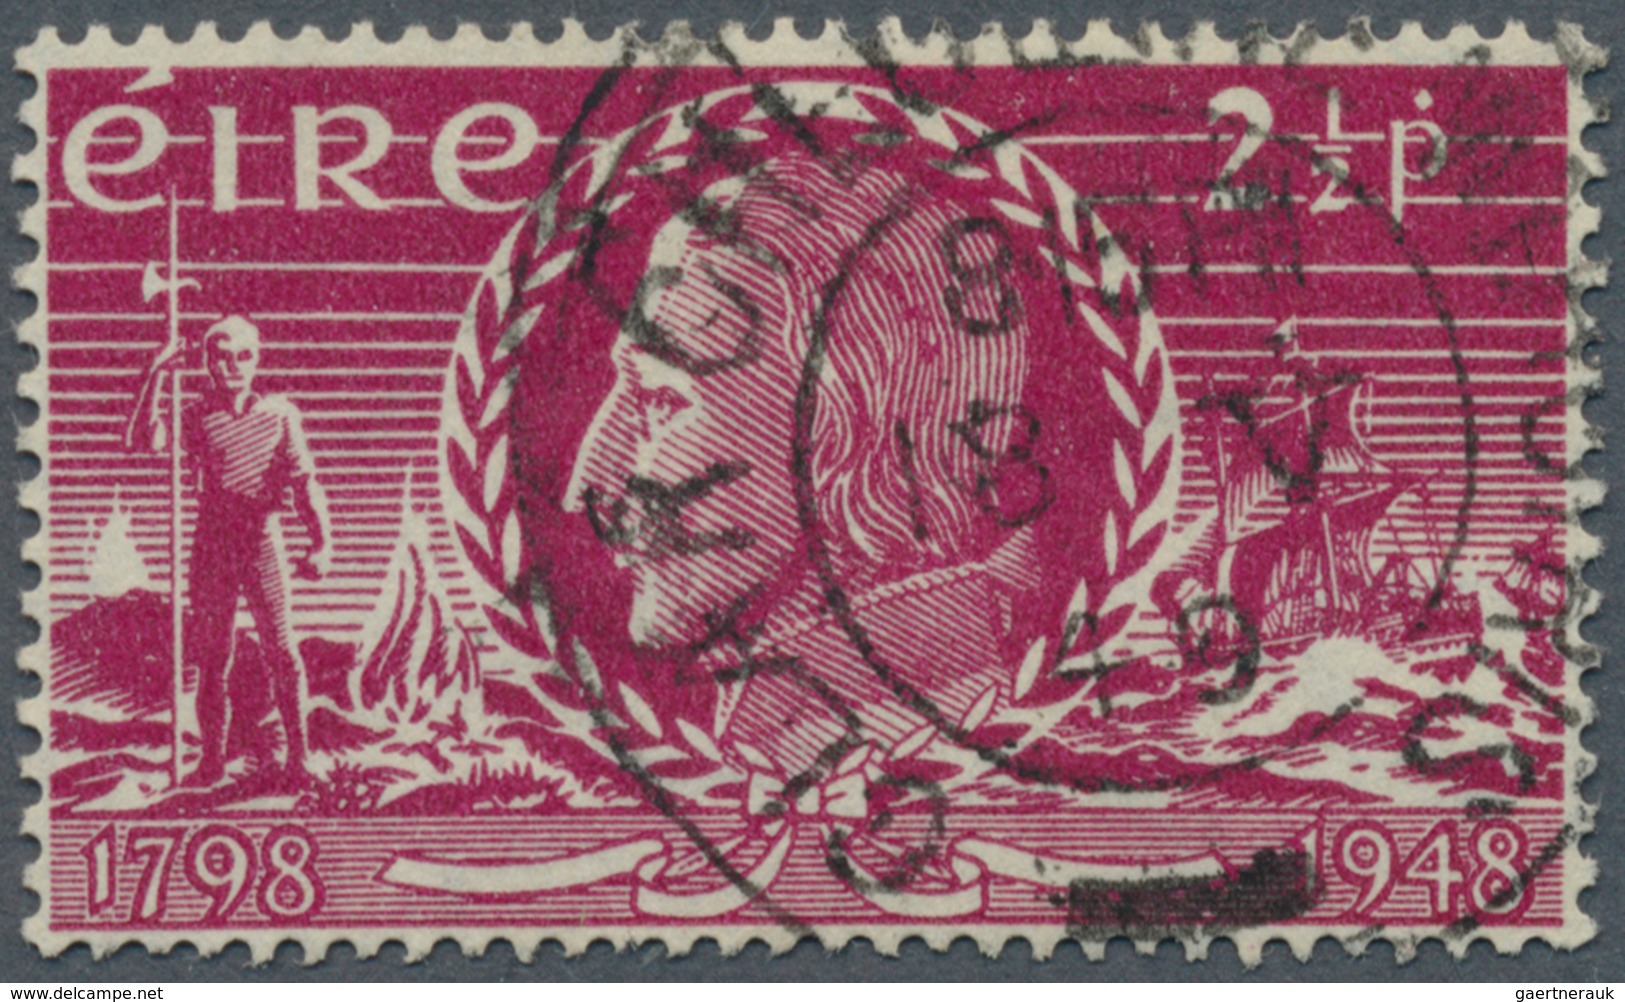 14337 Irland: 1948, 150th Anniversary Of Insurrection, 2½d. Reddish Purple With Inverted Watermark, Neatly - Lettres & Documents